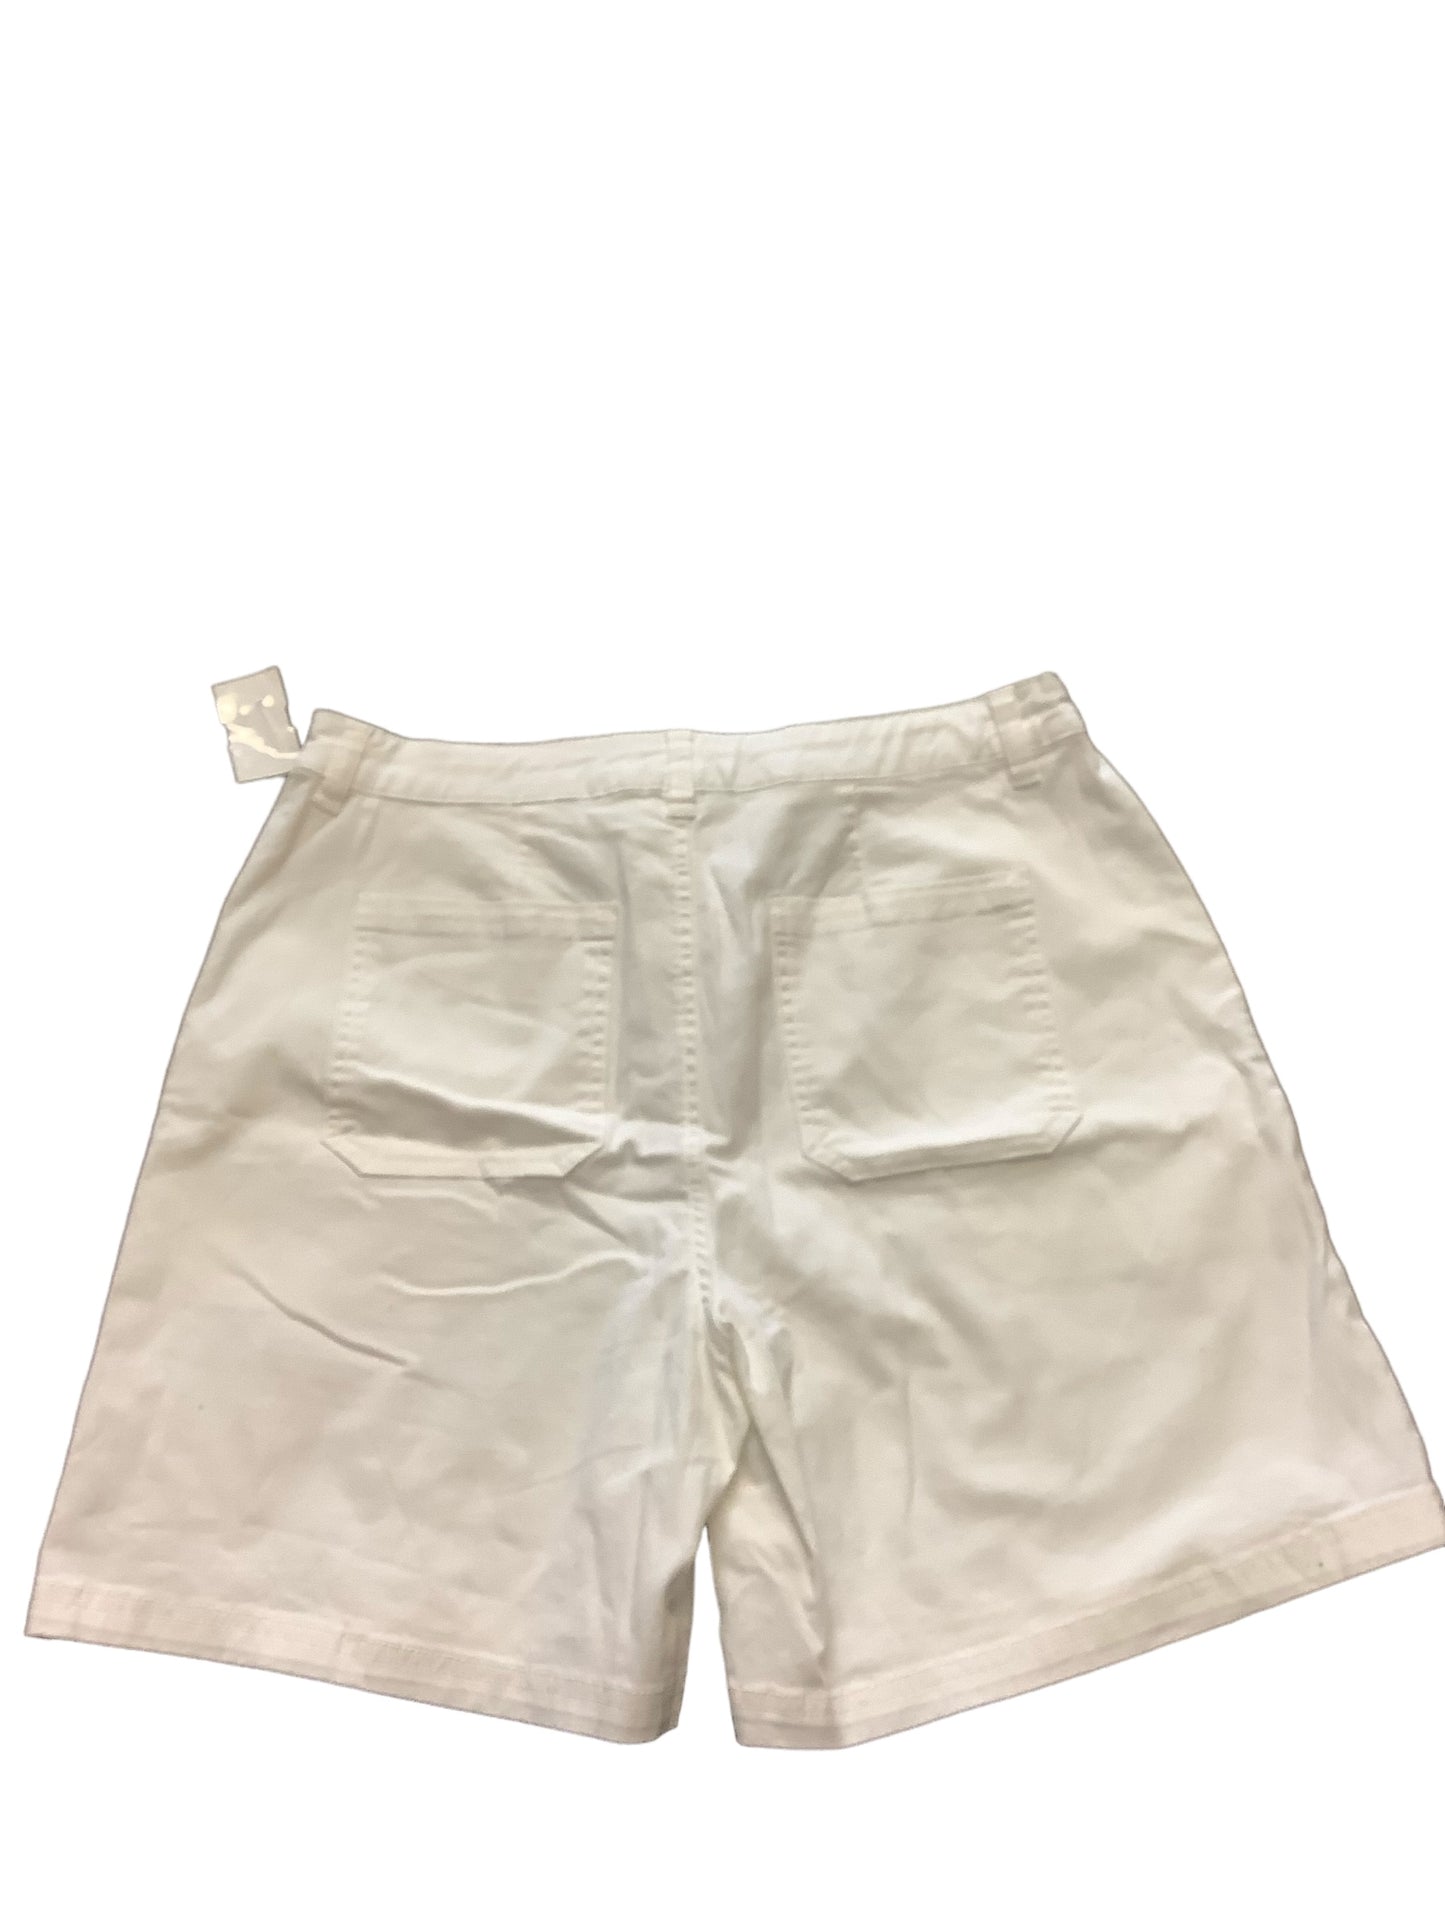 Shorts By 89th And Madison  Size: 10